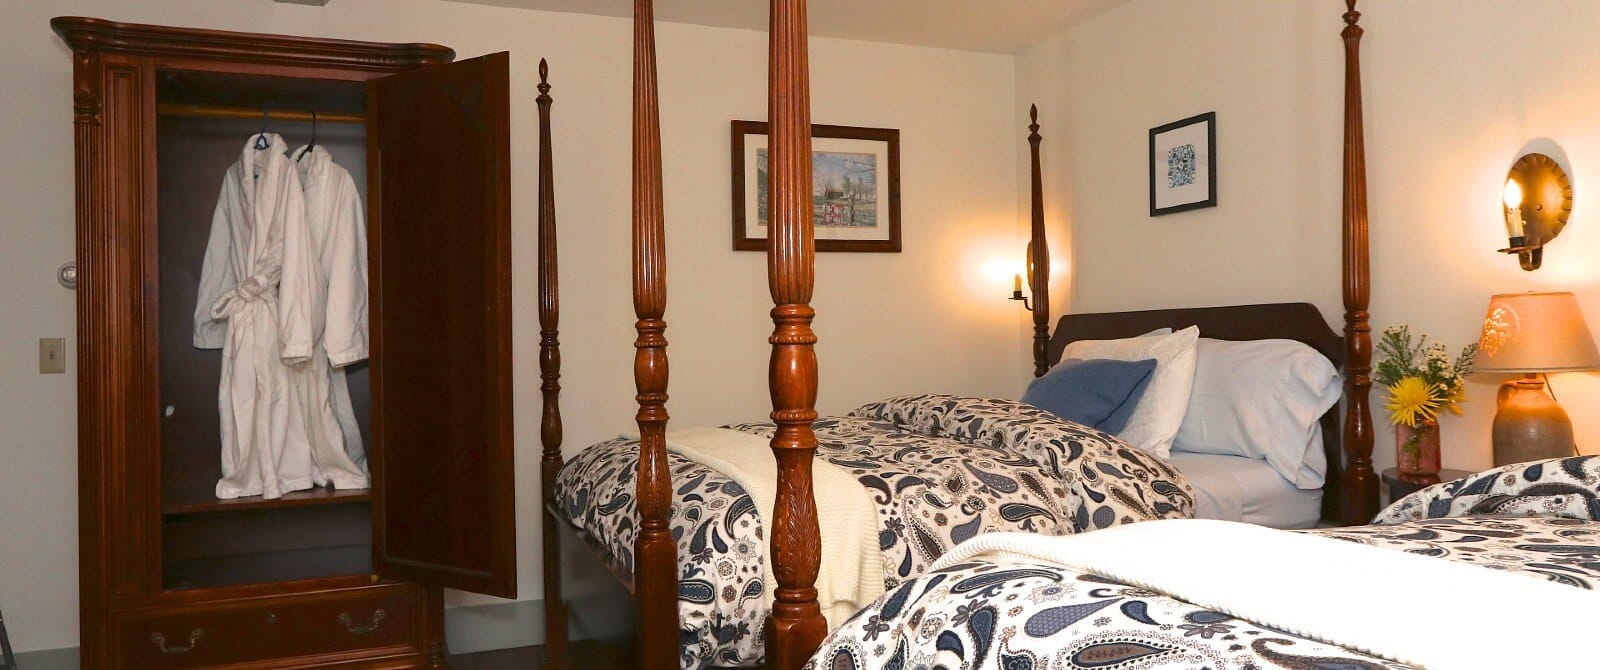 Two four poster double beds in bedroom with open armoire showing two white hanging robes